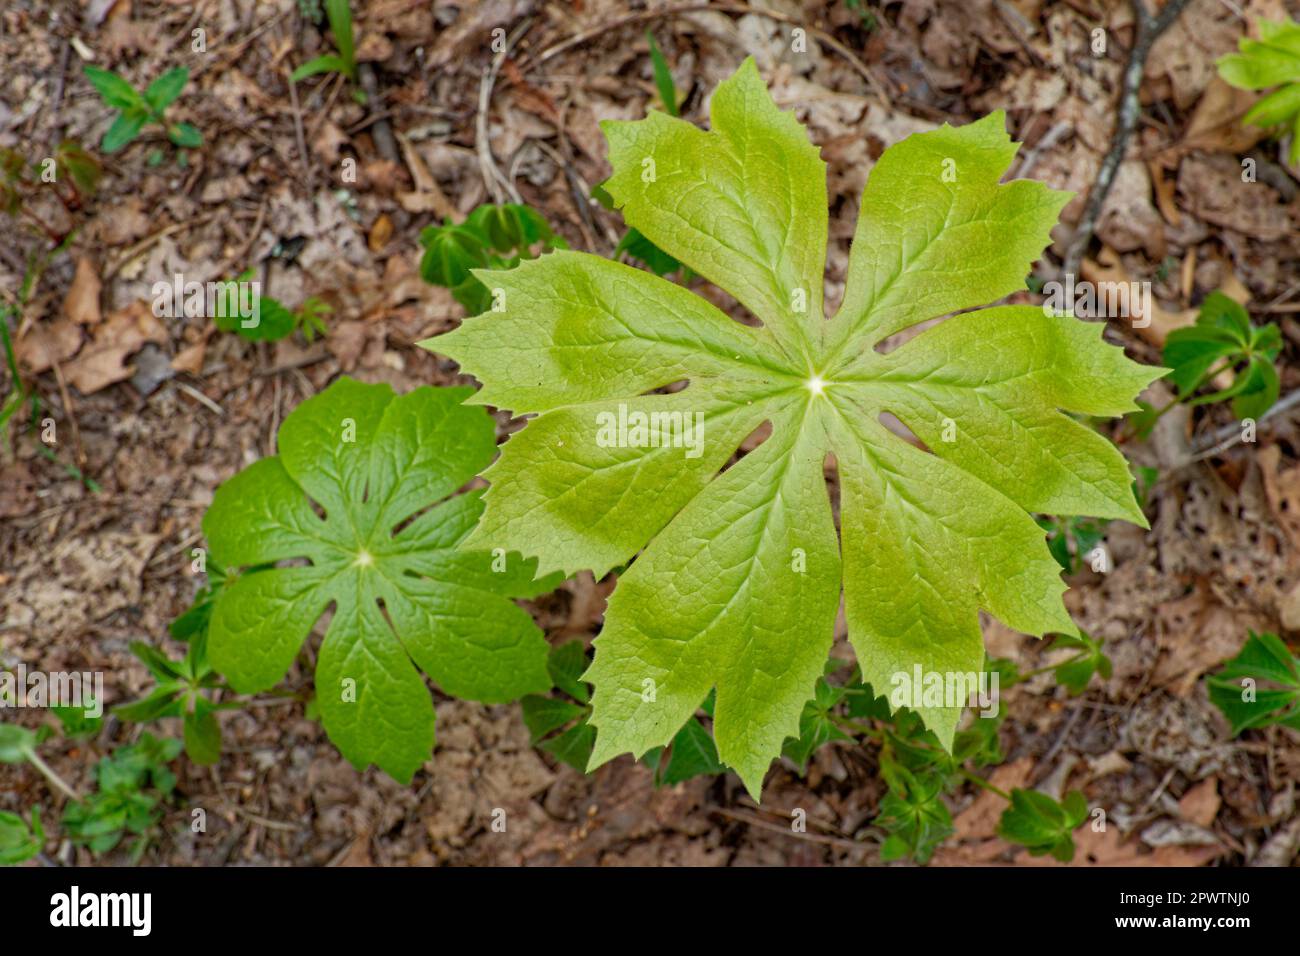 Looking down on the tops of emerging mayapple plants surrounded by fallen leaves in the forest in springtime closeup view Stock Photo